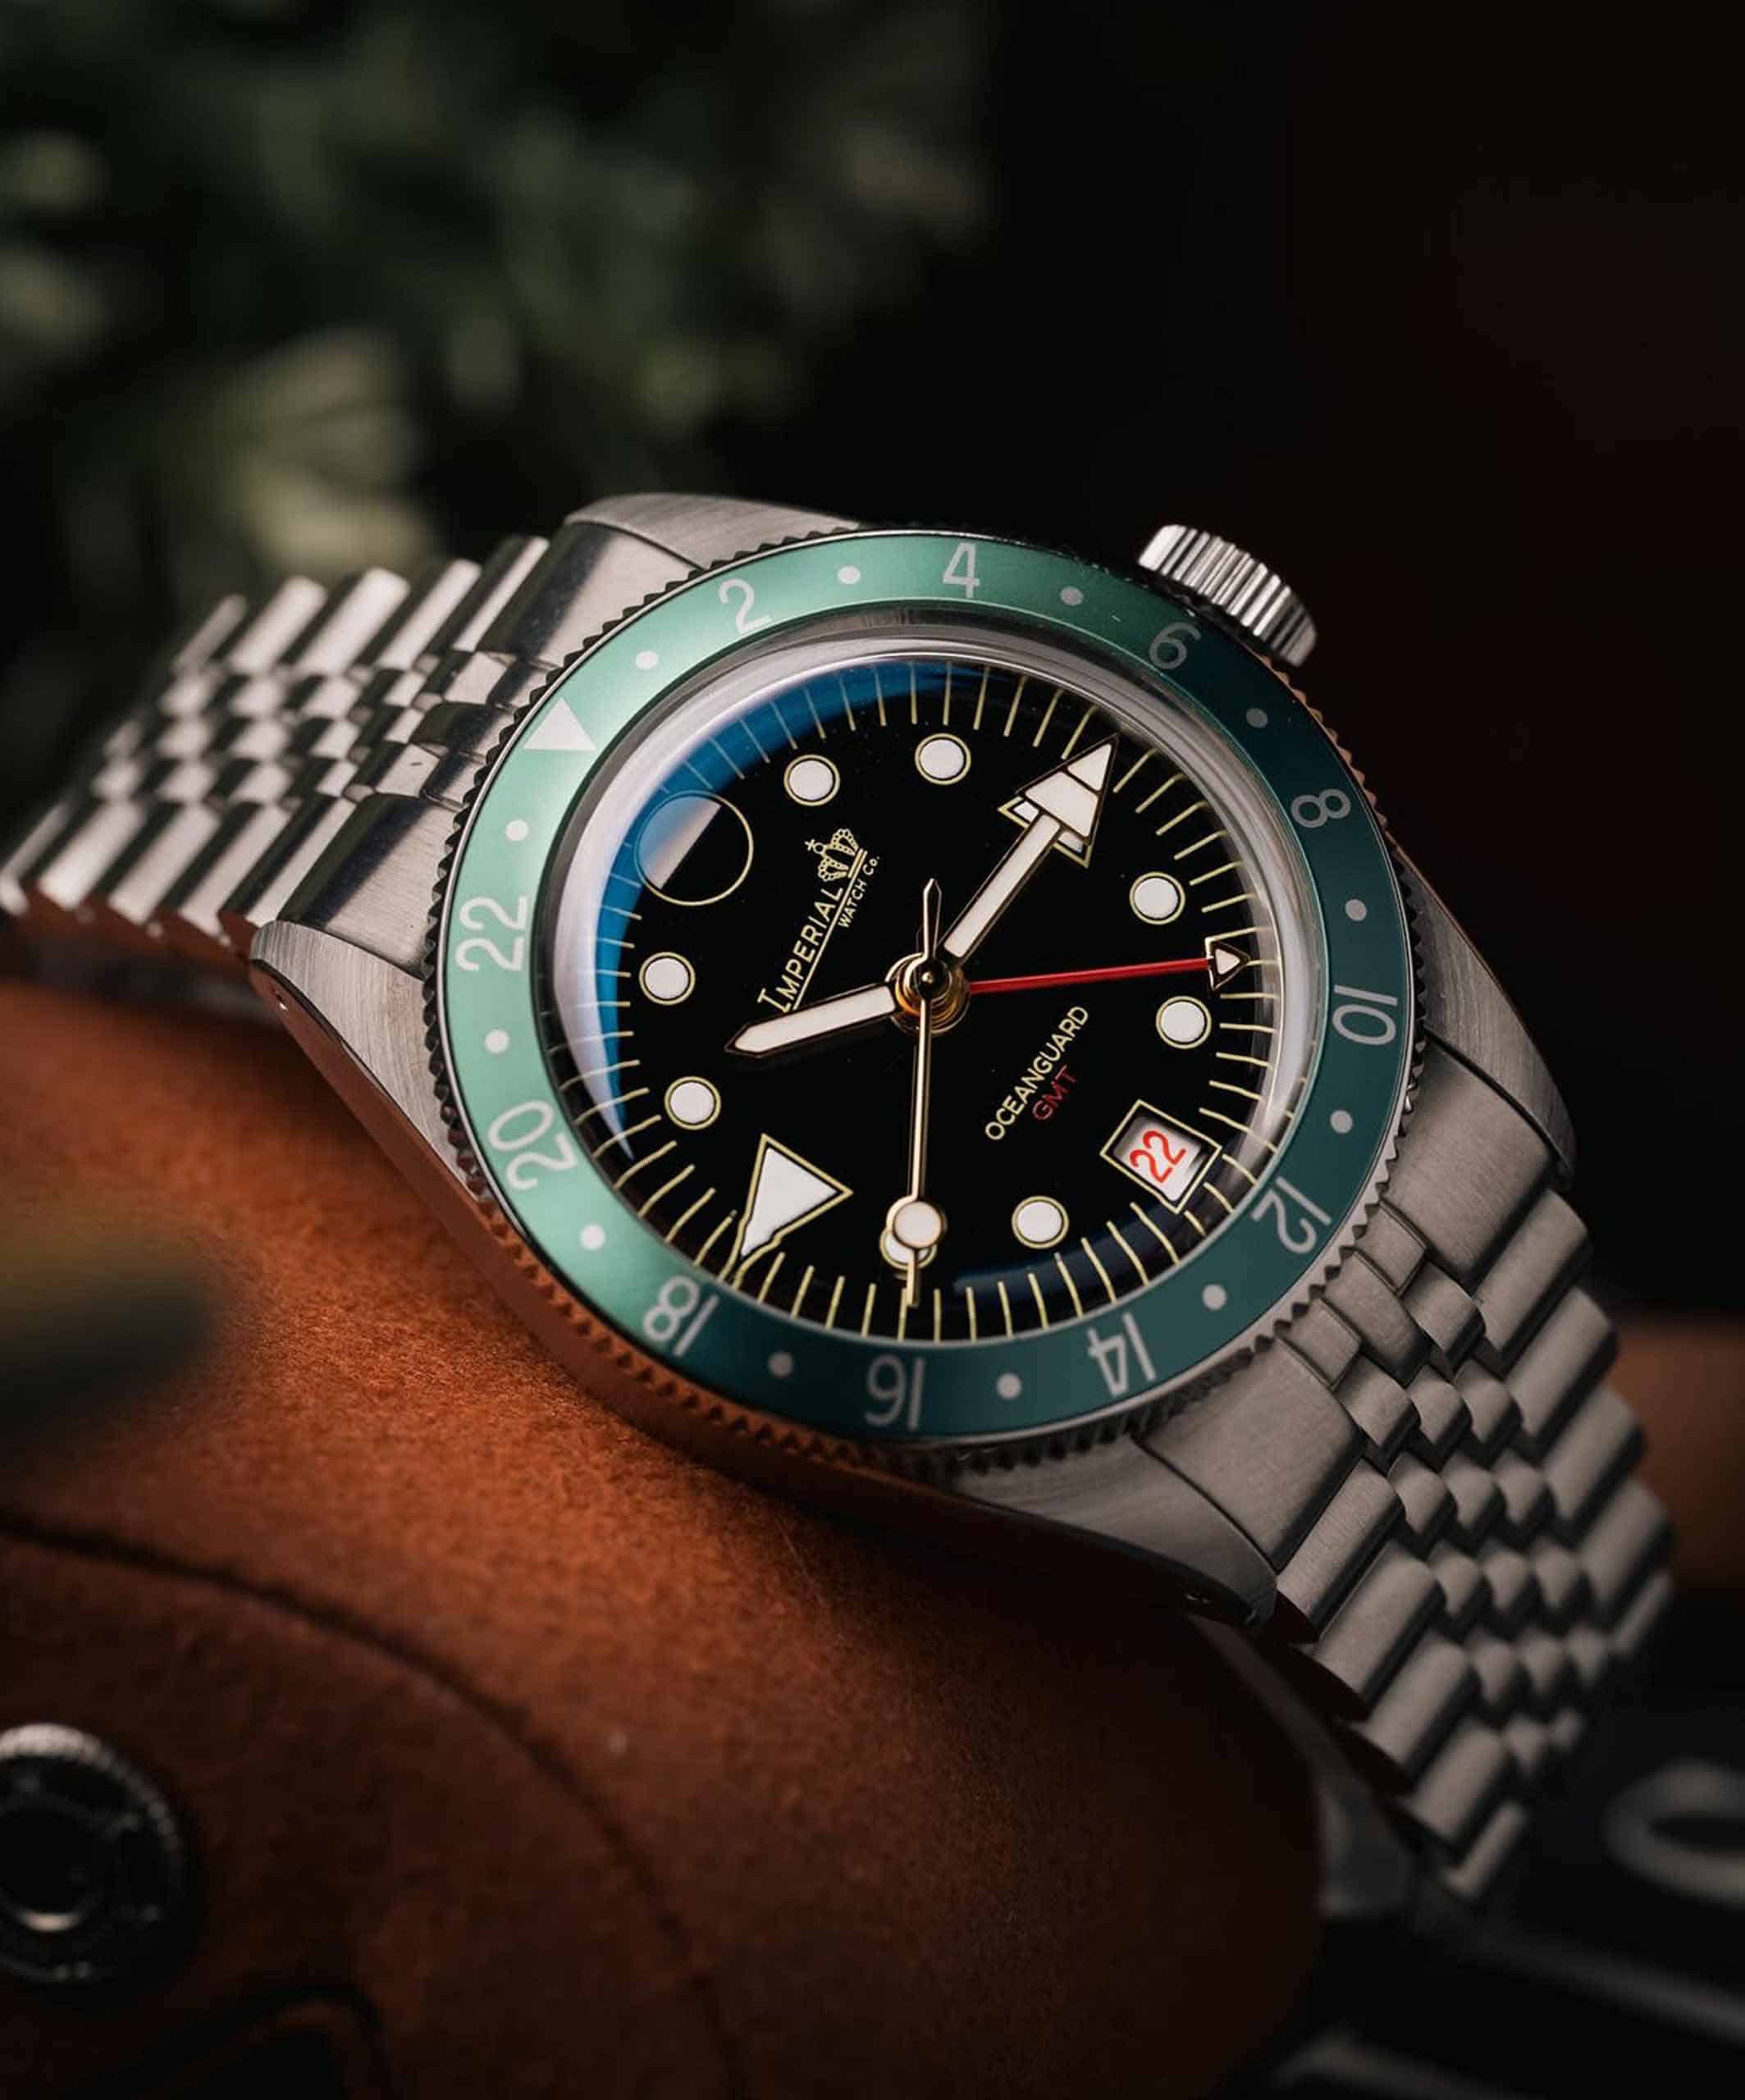 Imperial’s new Oceanguard GMT Imperial-Oceanguard-GMT-4